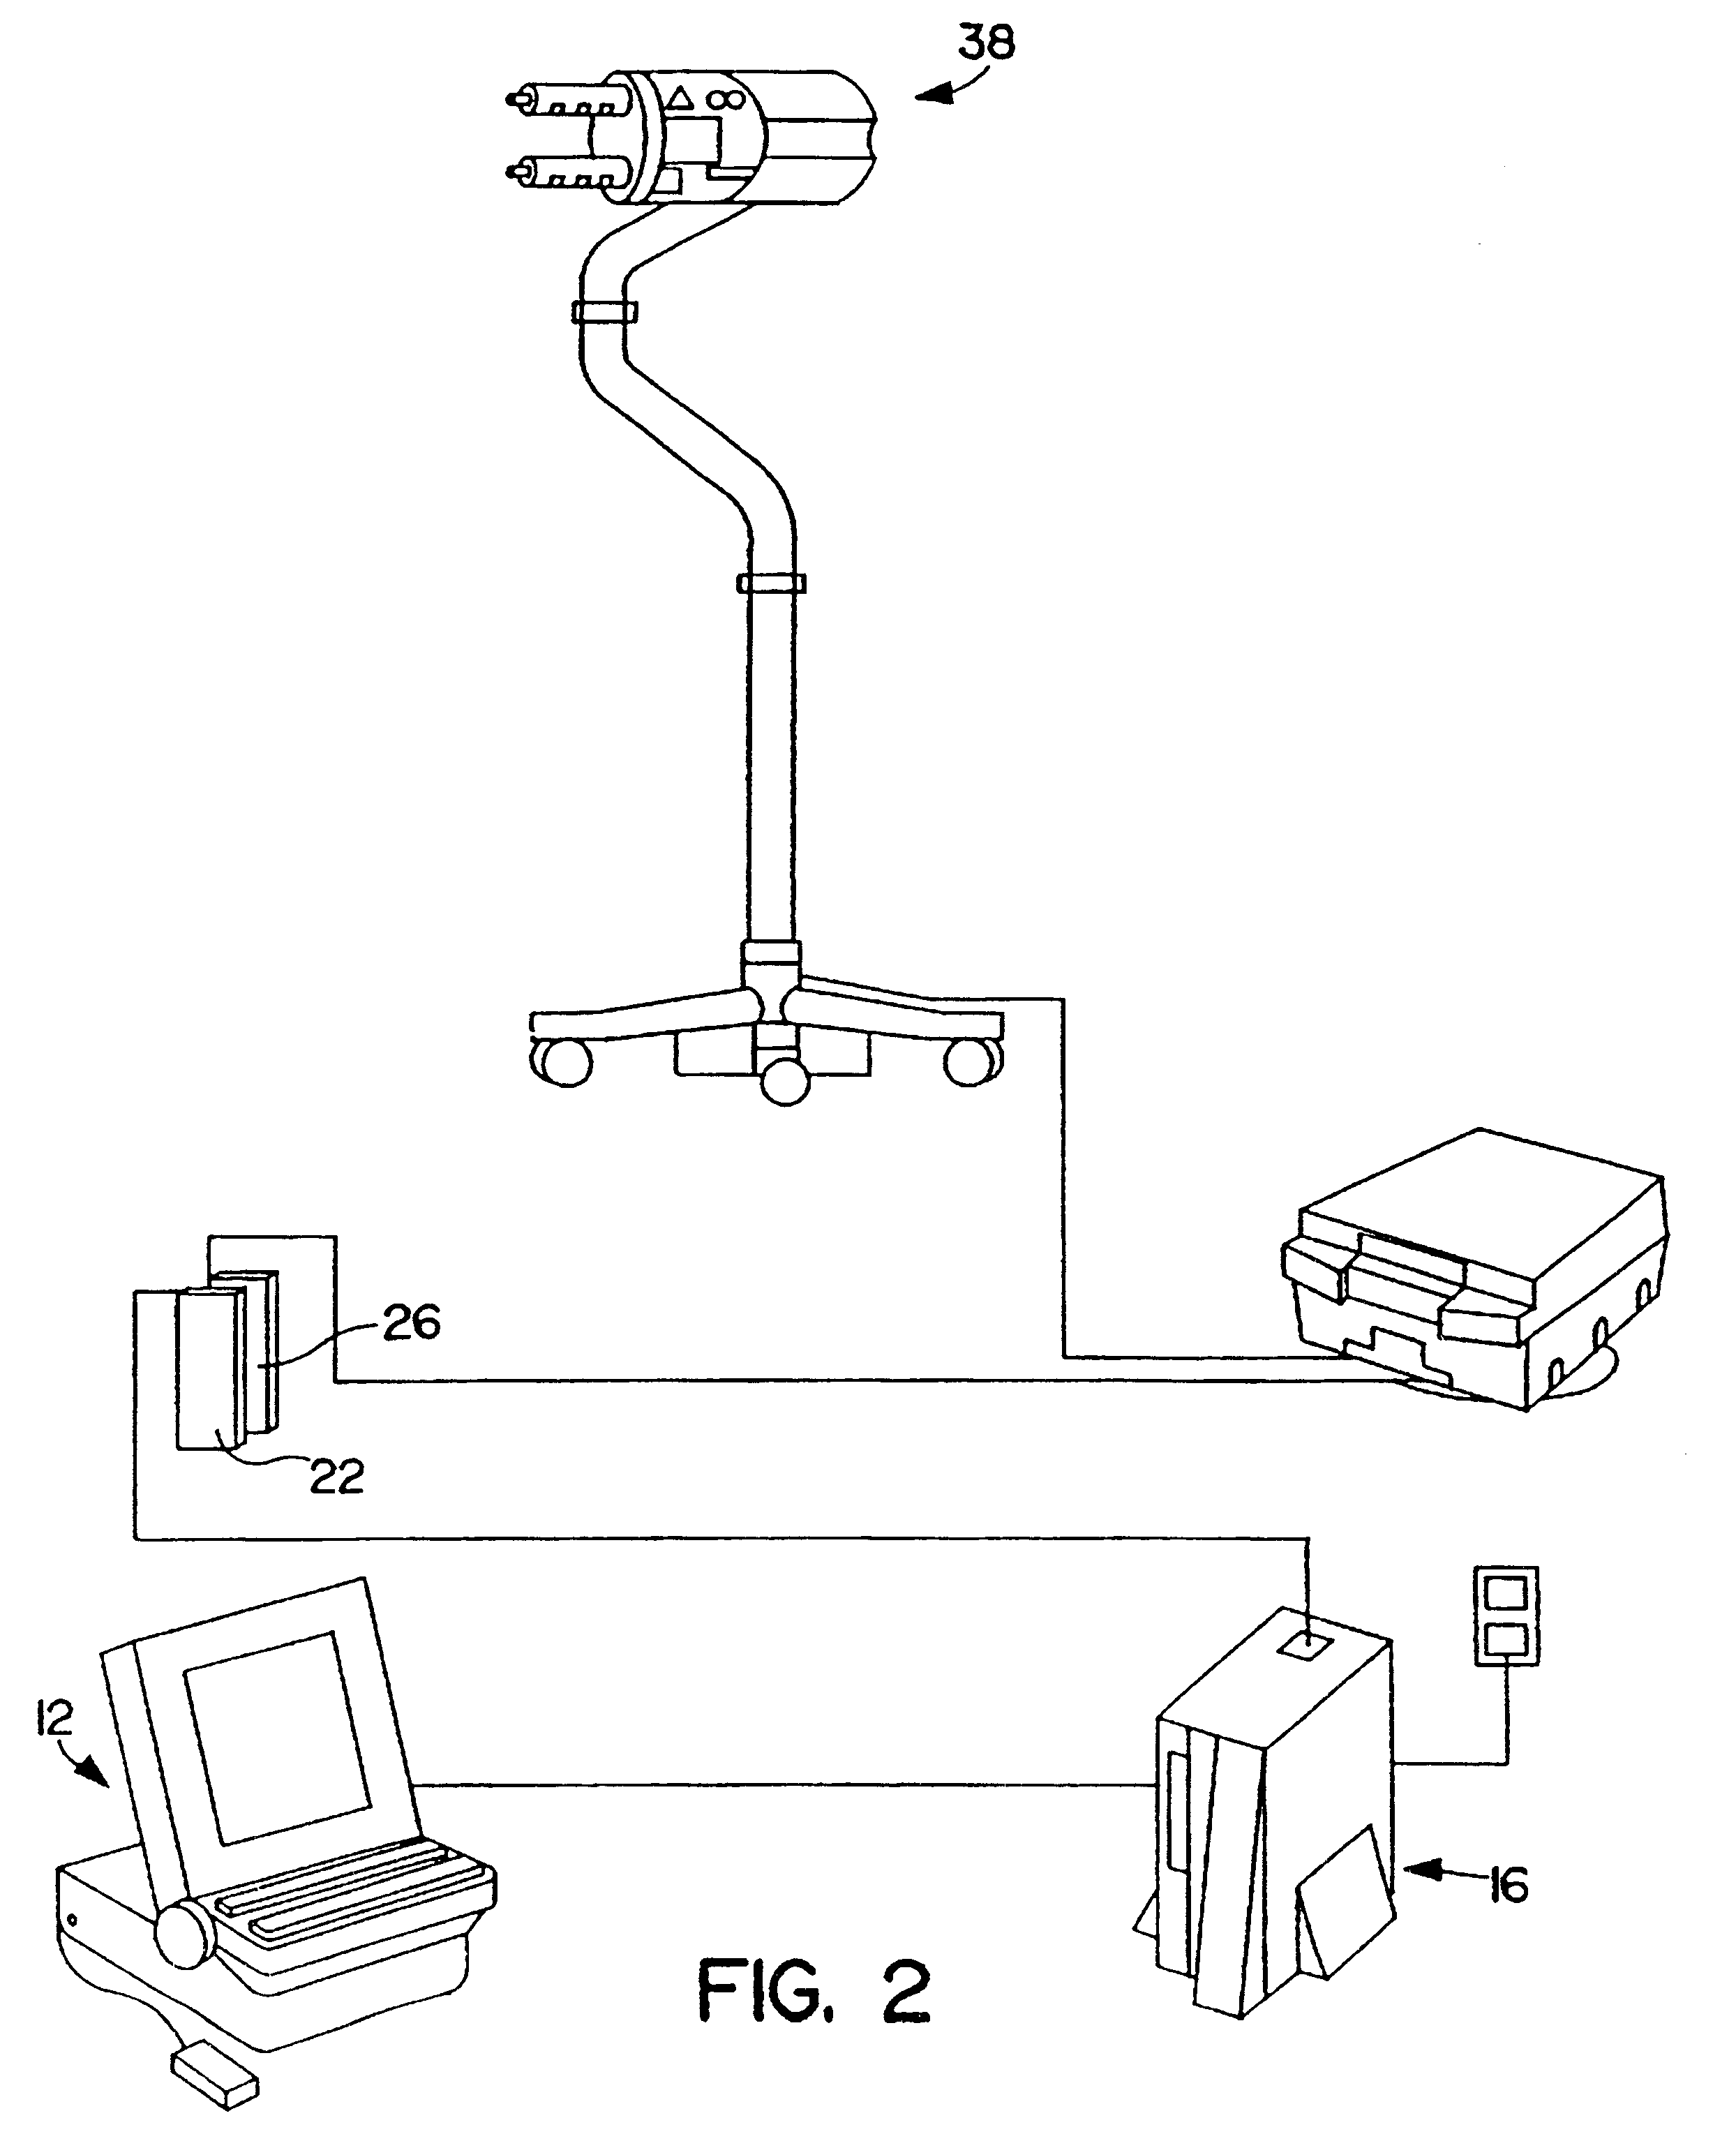 Patient infusion system for use with MRI